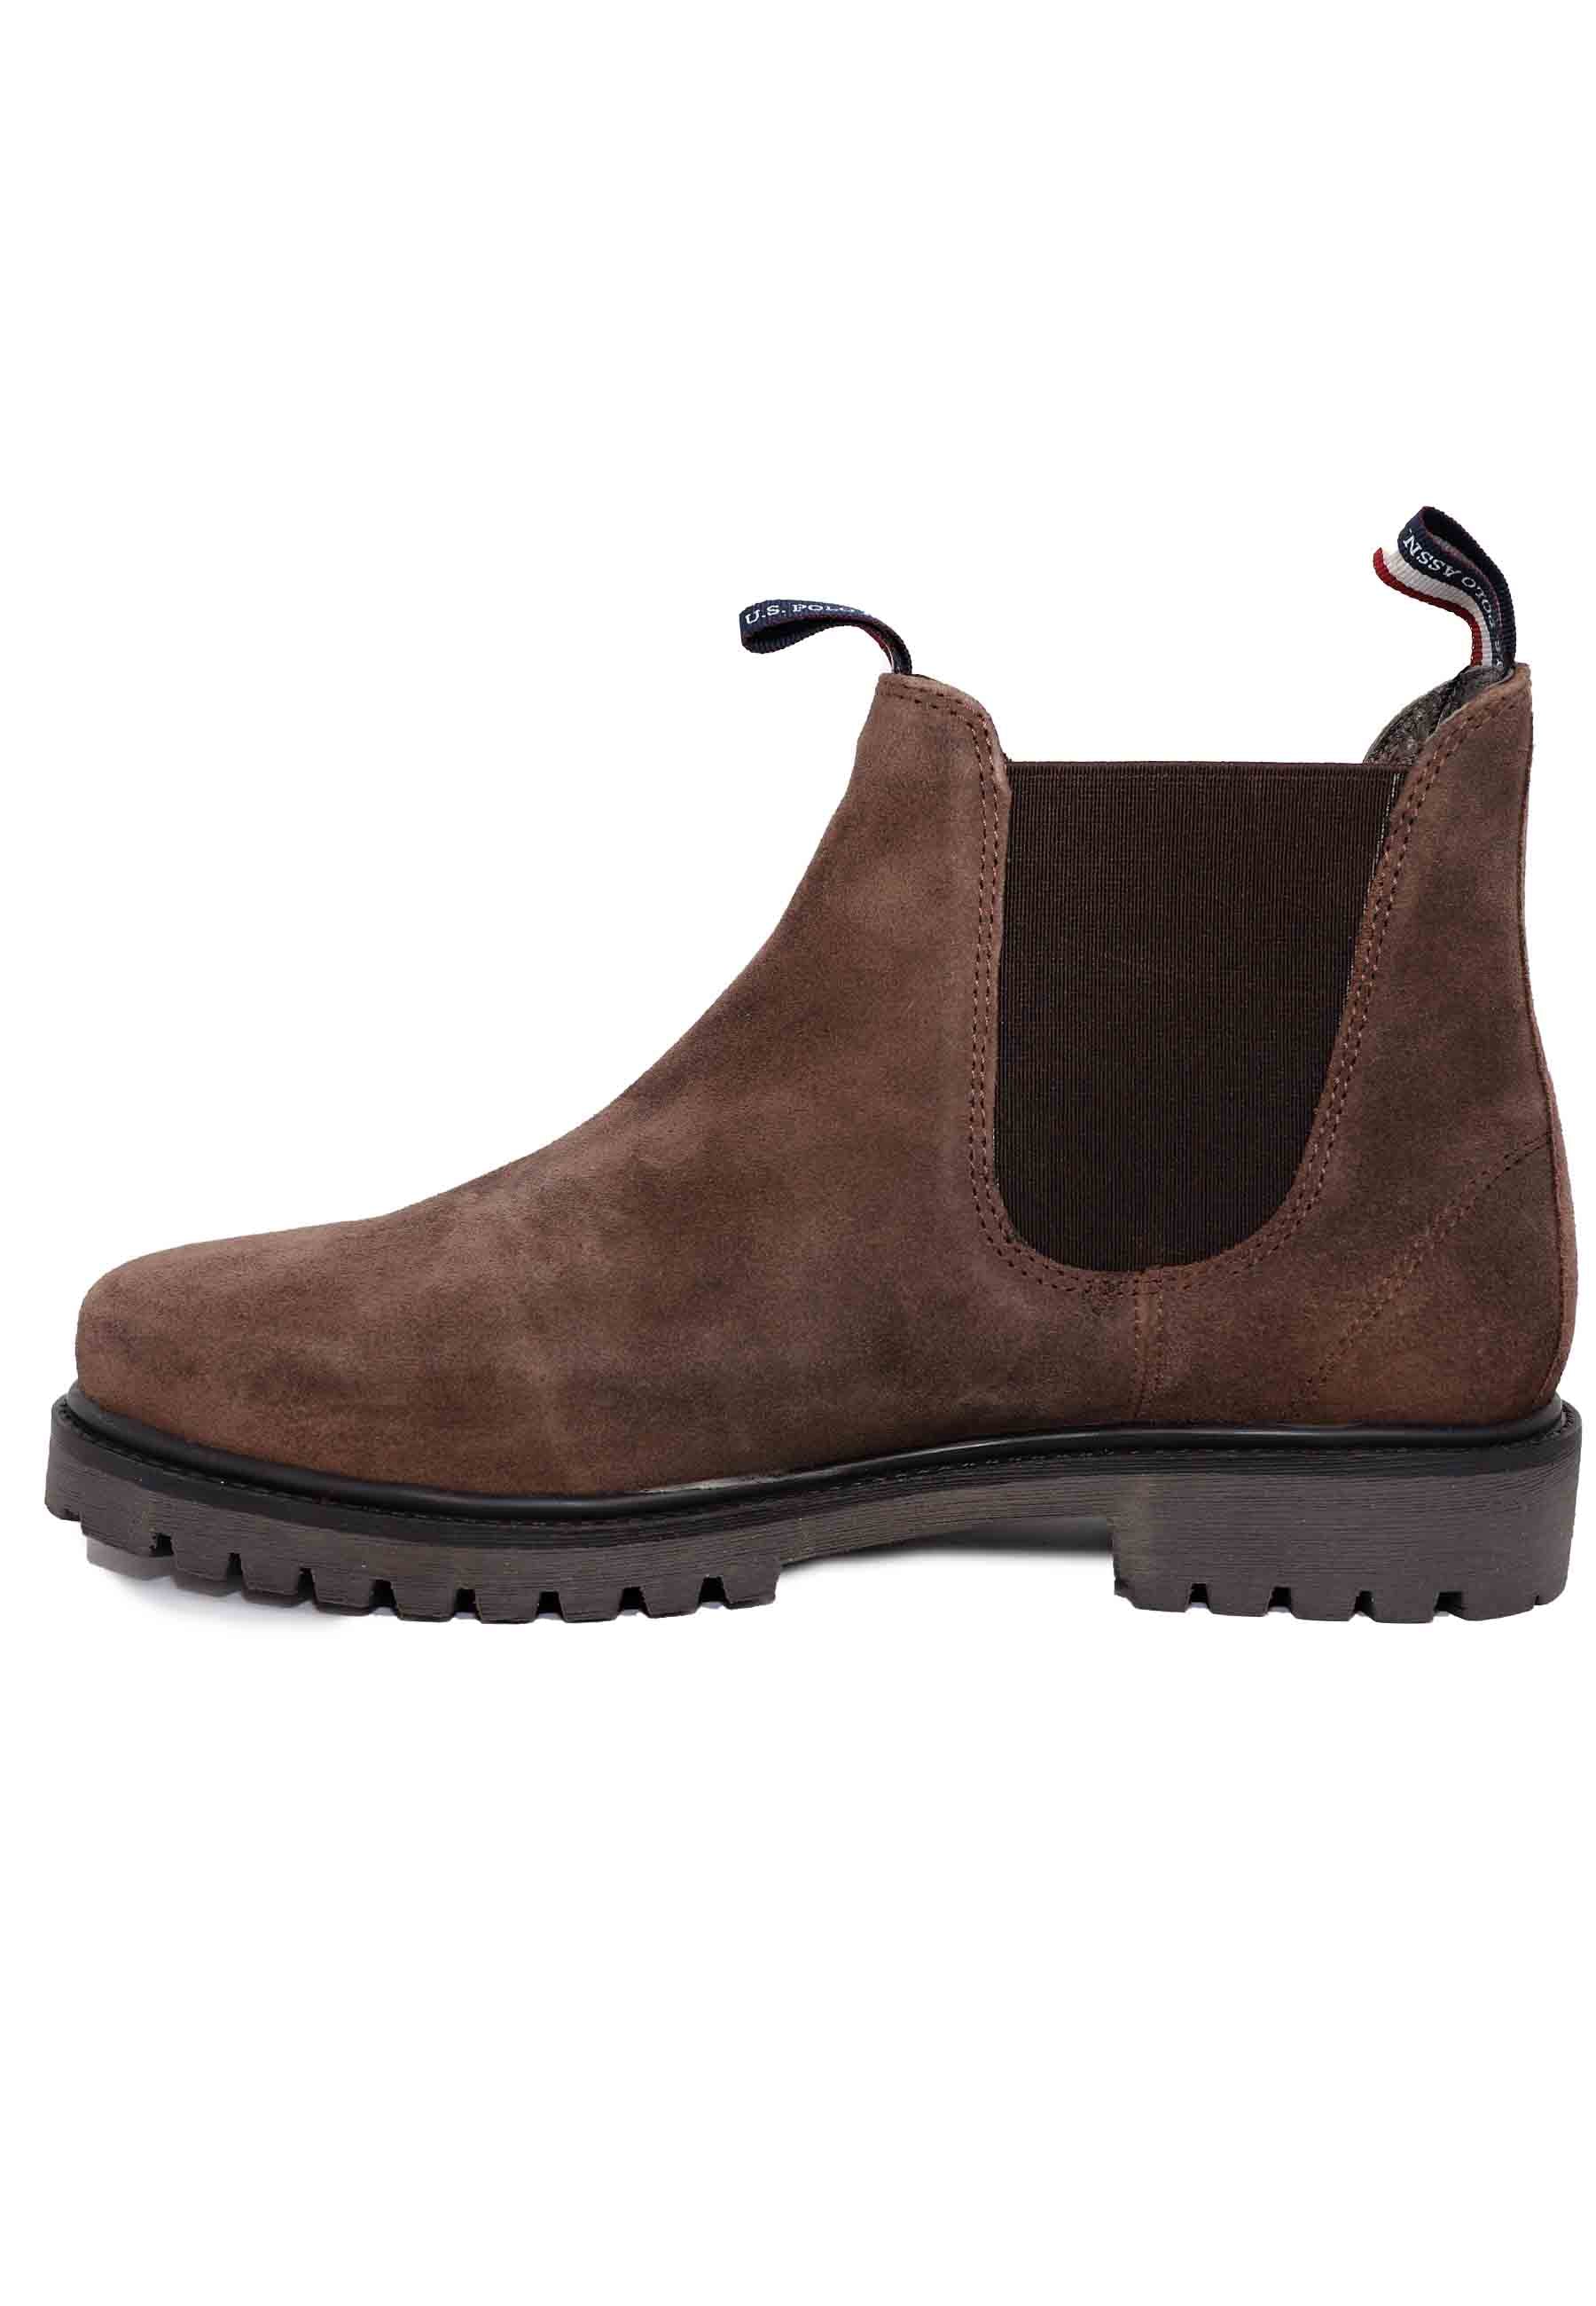 Men's ankle boots in brown suede with lug sole